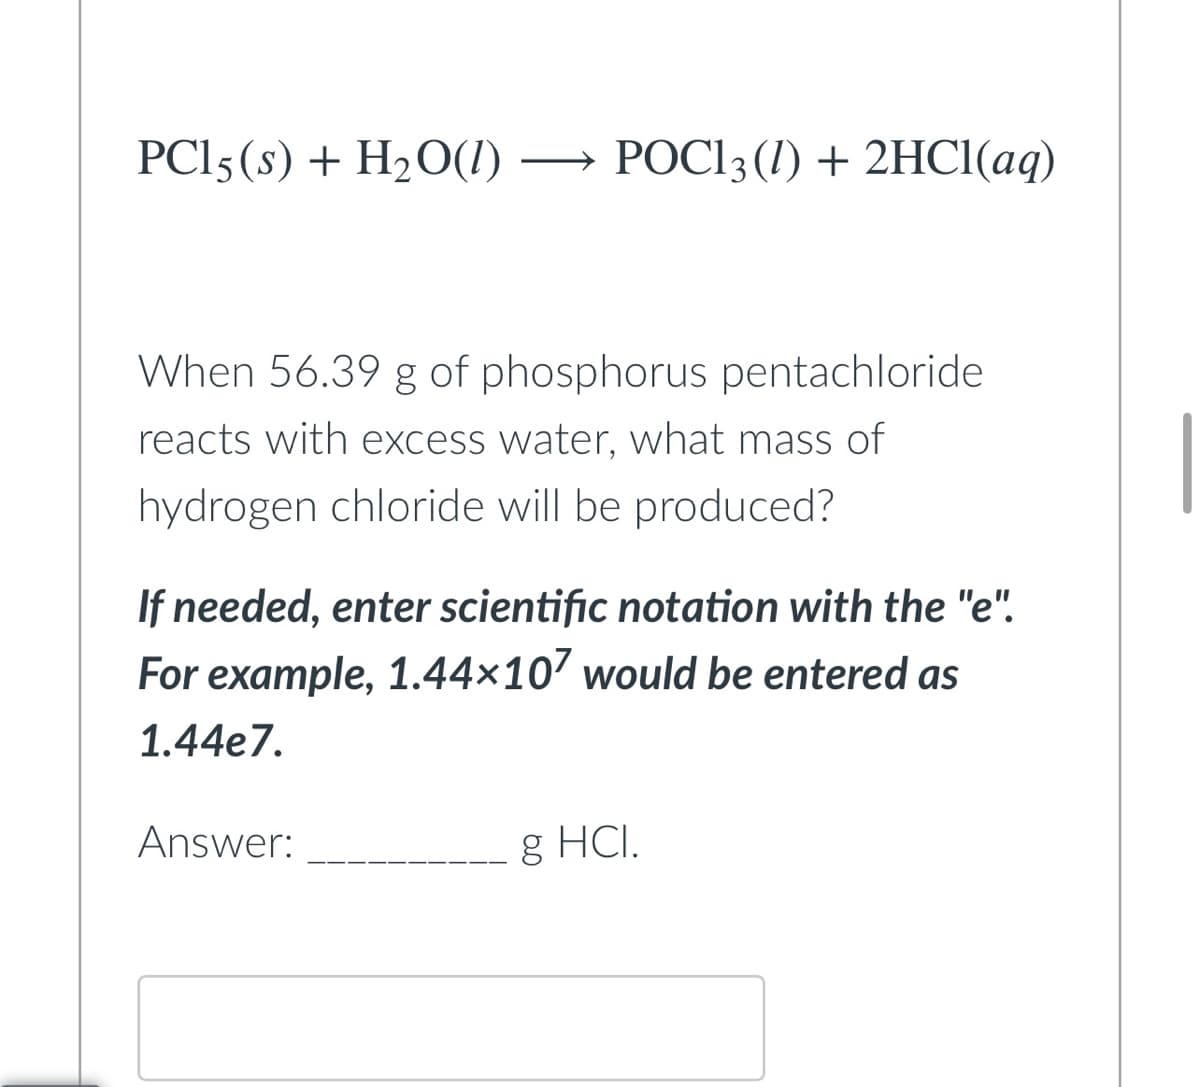 PC15 (s) + H₂O(1)
POC13 (1) + 2HCl(aq)
When 56.39 g of phosphorus pentachloride
reacts with excess water, what mass of
hydrogen chloride will be produced?
If needed, enter scientific notation with the "e".
For example, 1.44×107 would be entered as
1.44e7.
Answer:
g HCI.